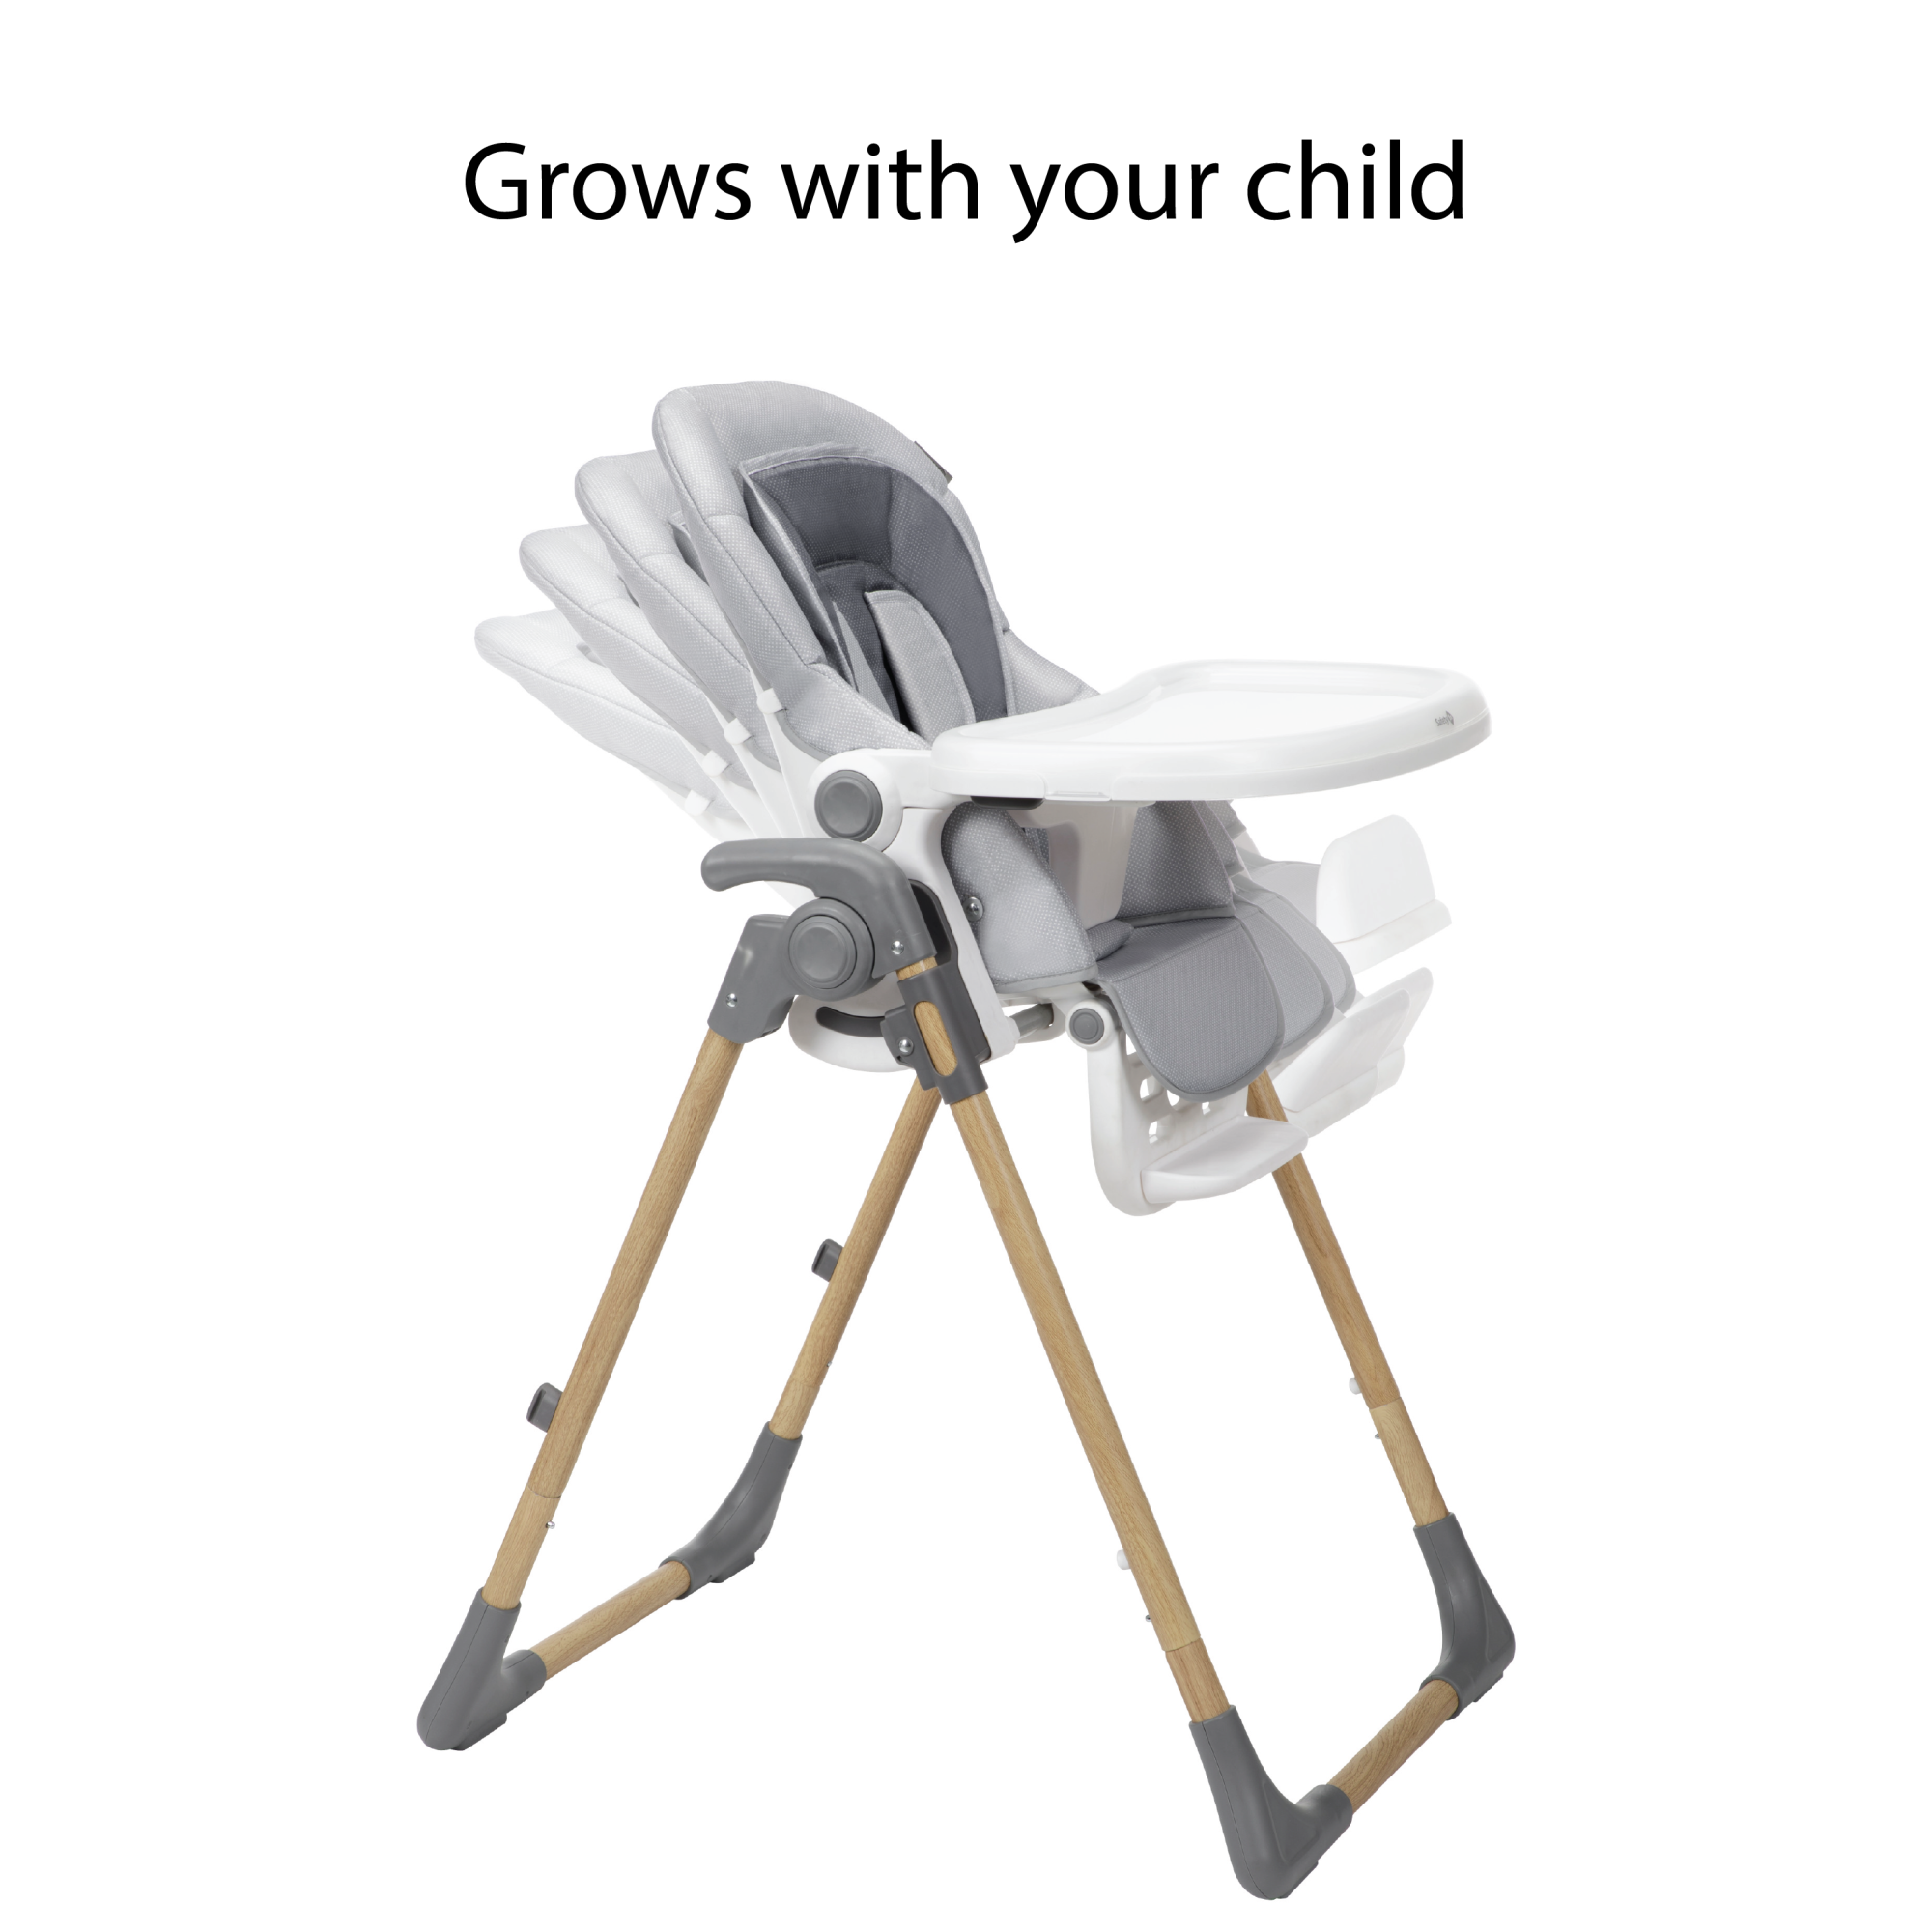 3-in-1 Grow and Go Plus High Chair - grows with your child